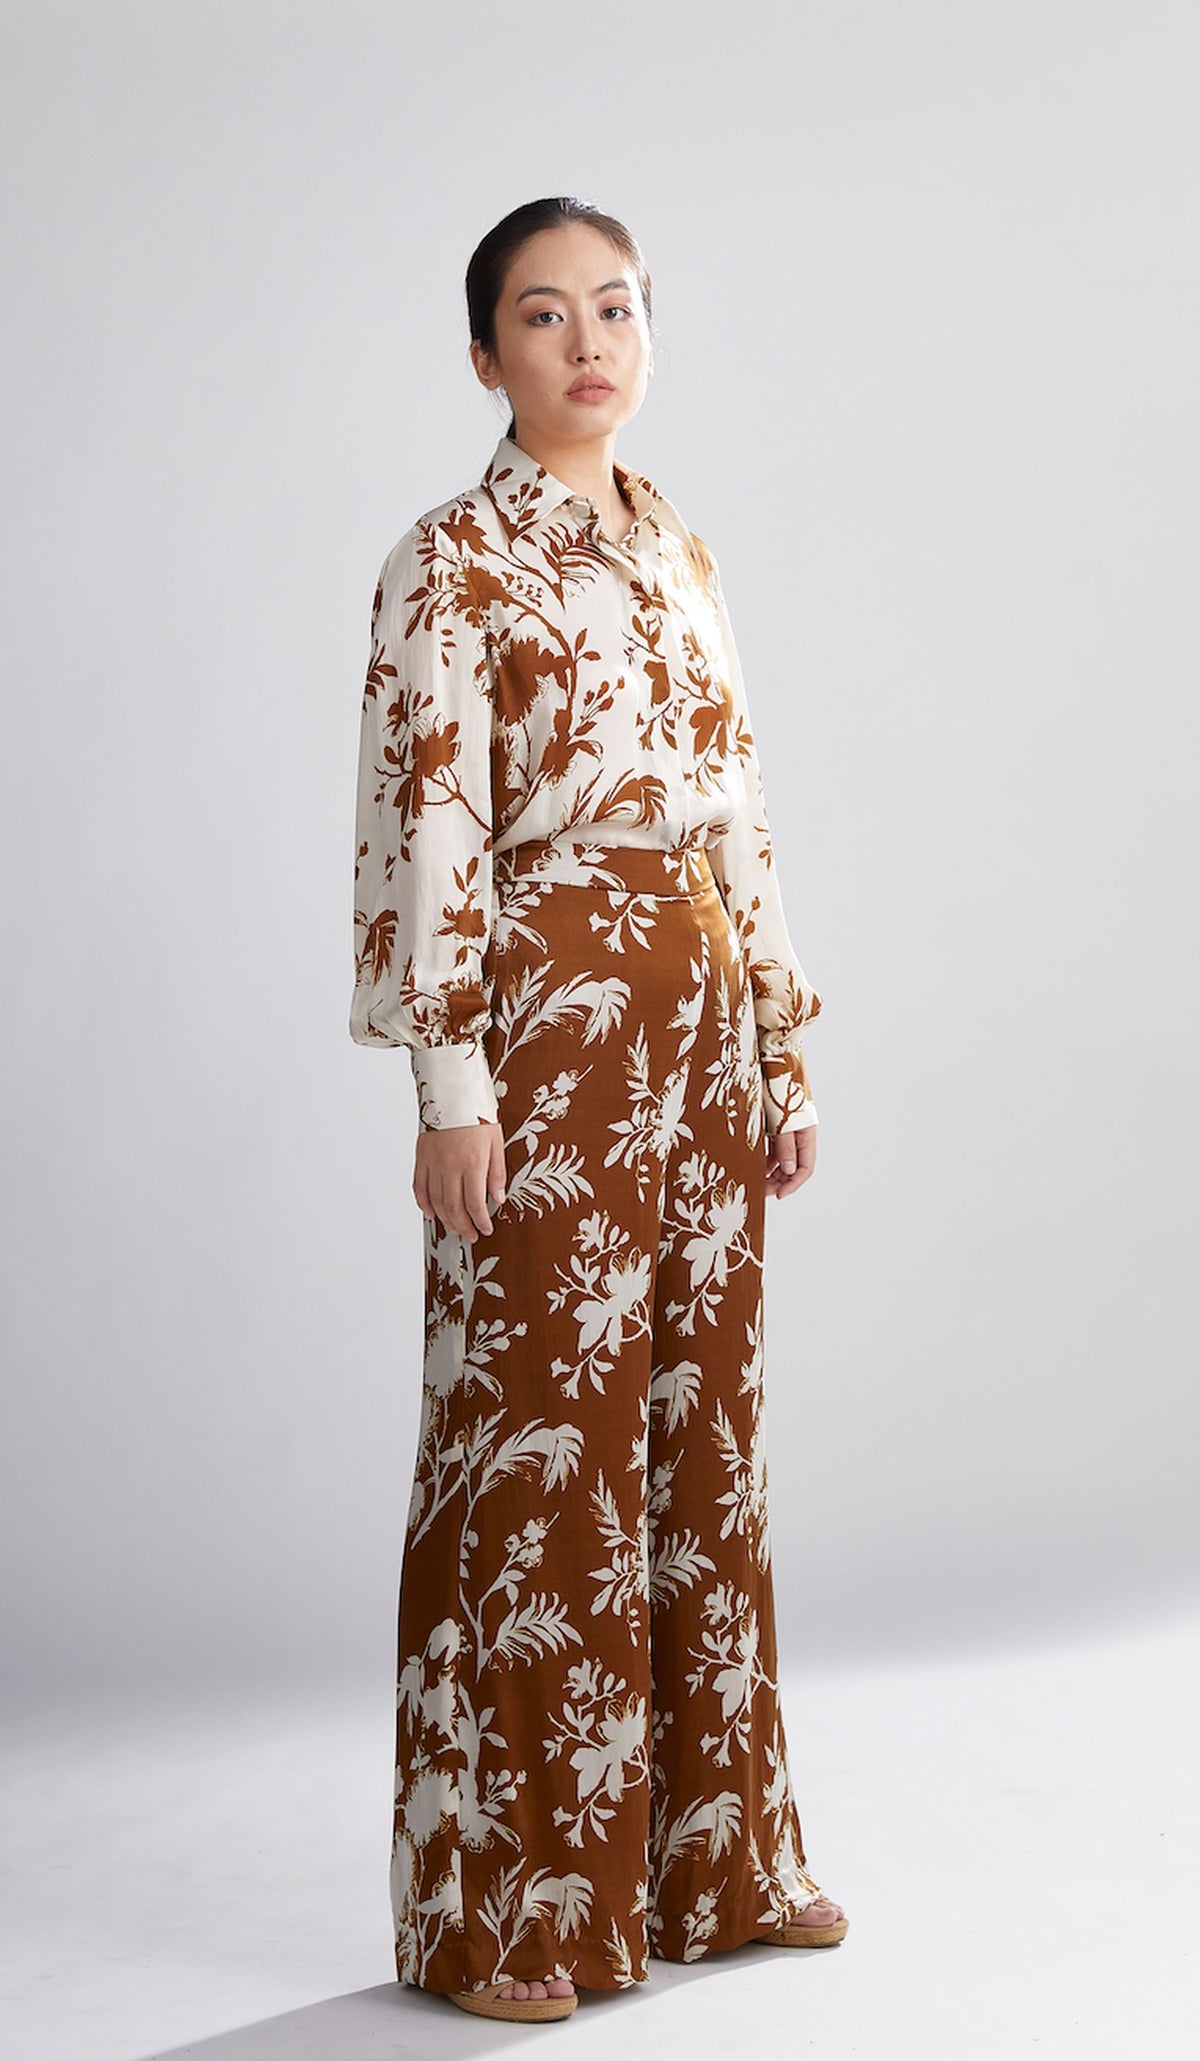 CREAM AND BROWN FLORAL SHIRT